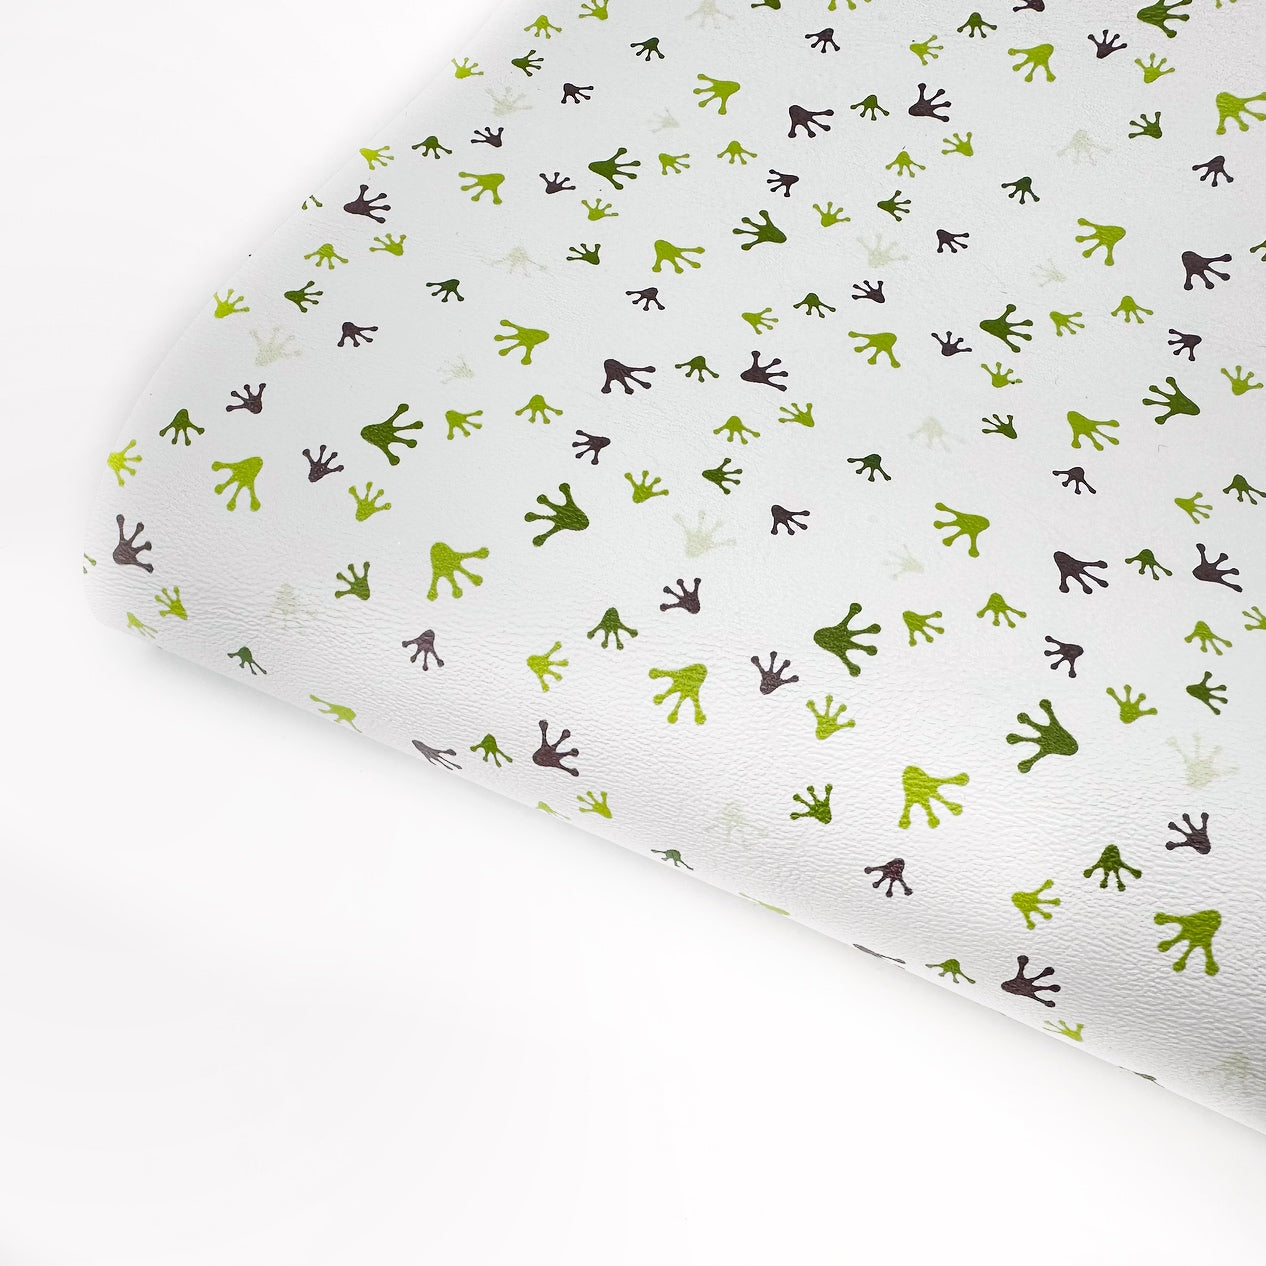 Froggy Footprints Premium Faux Leather Fabric Sheets